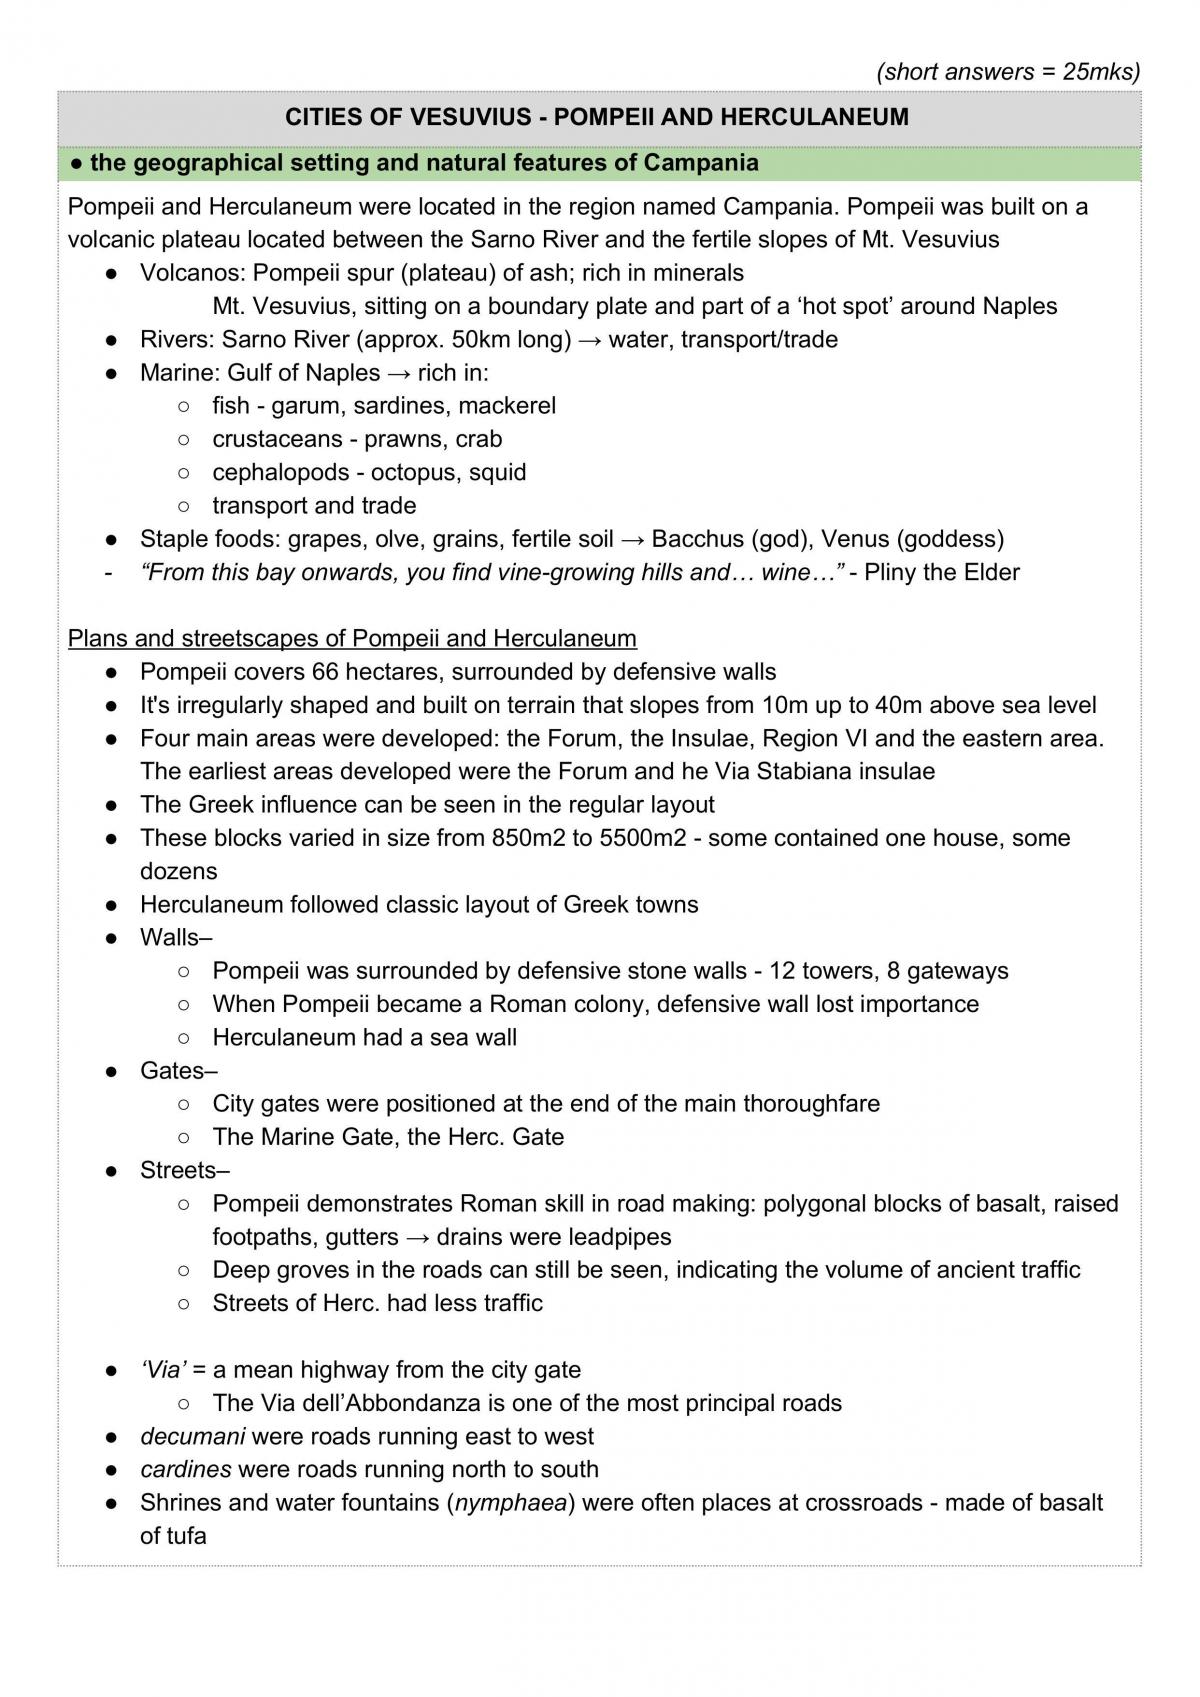 Ancient History: Cities Of Vesuvius - Complete Notes - Page 1